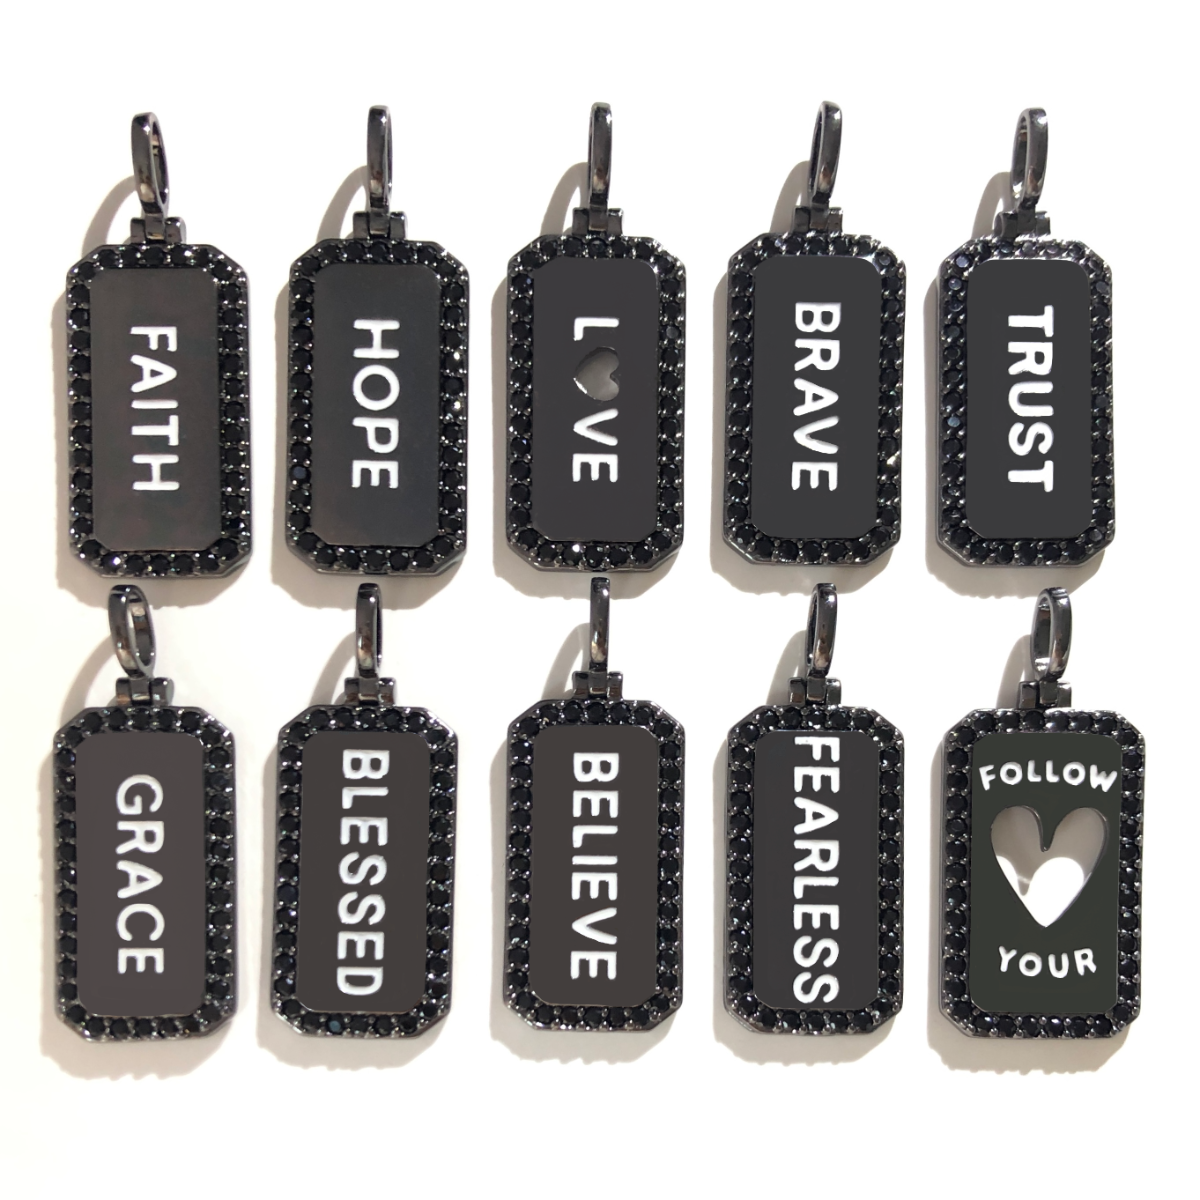 10pcs/lot CZ Paved Faith Hope Love Brave Trust Grace Blessed Believe Fearless Follow Your Heart Word Tags Charms Bundles Black on Black CZ Paved Charms Christian Quotes Mix Charms New Charms Arrivals Word Tags Charms Beads Beyond